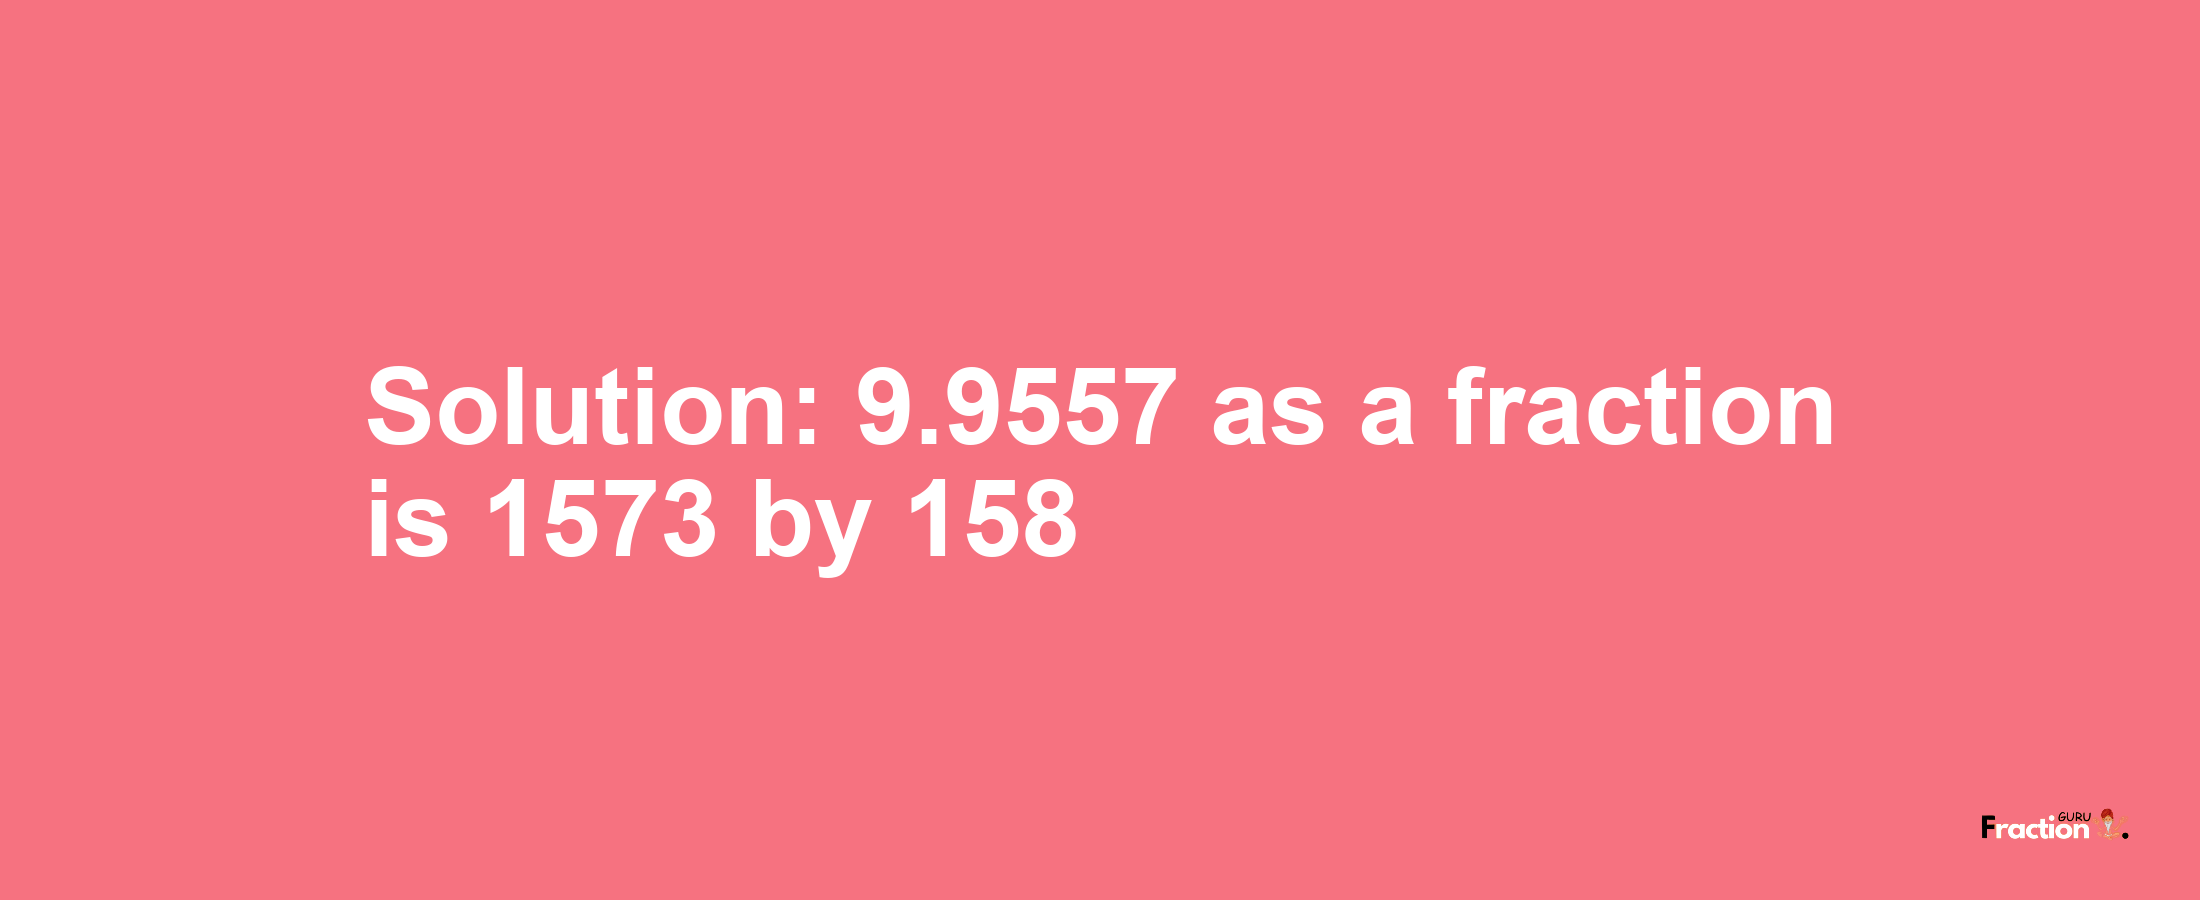 Solution:9.9557 as a fraction is 1573/158